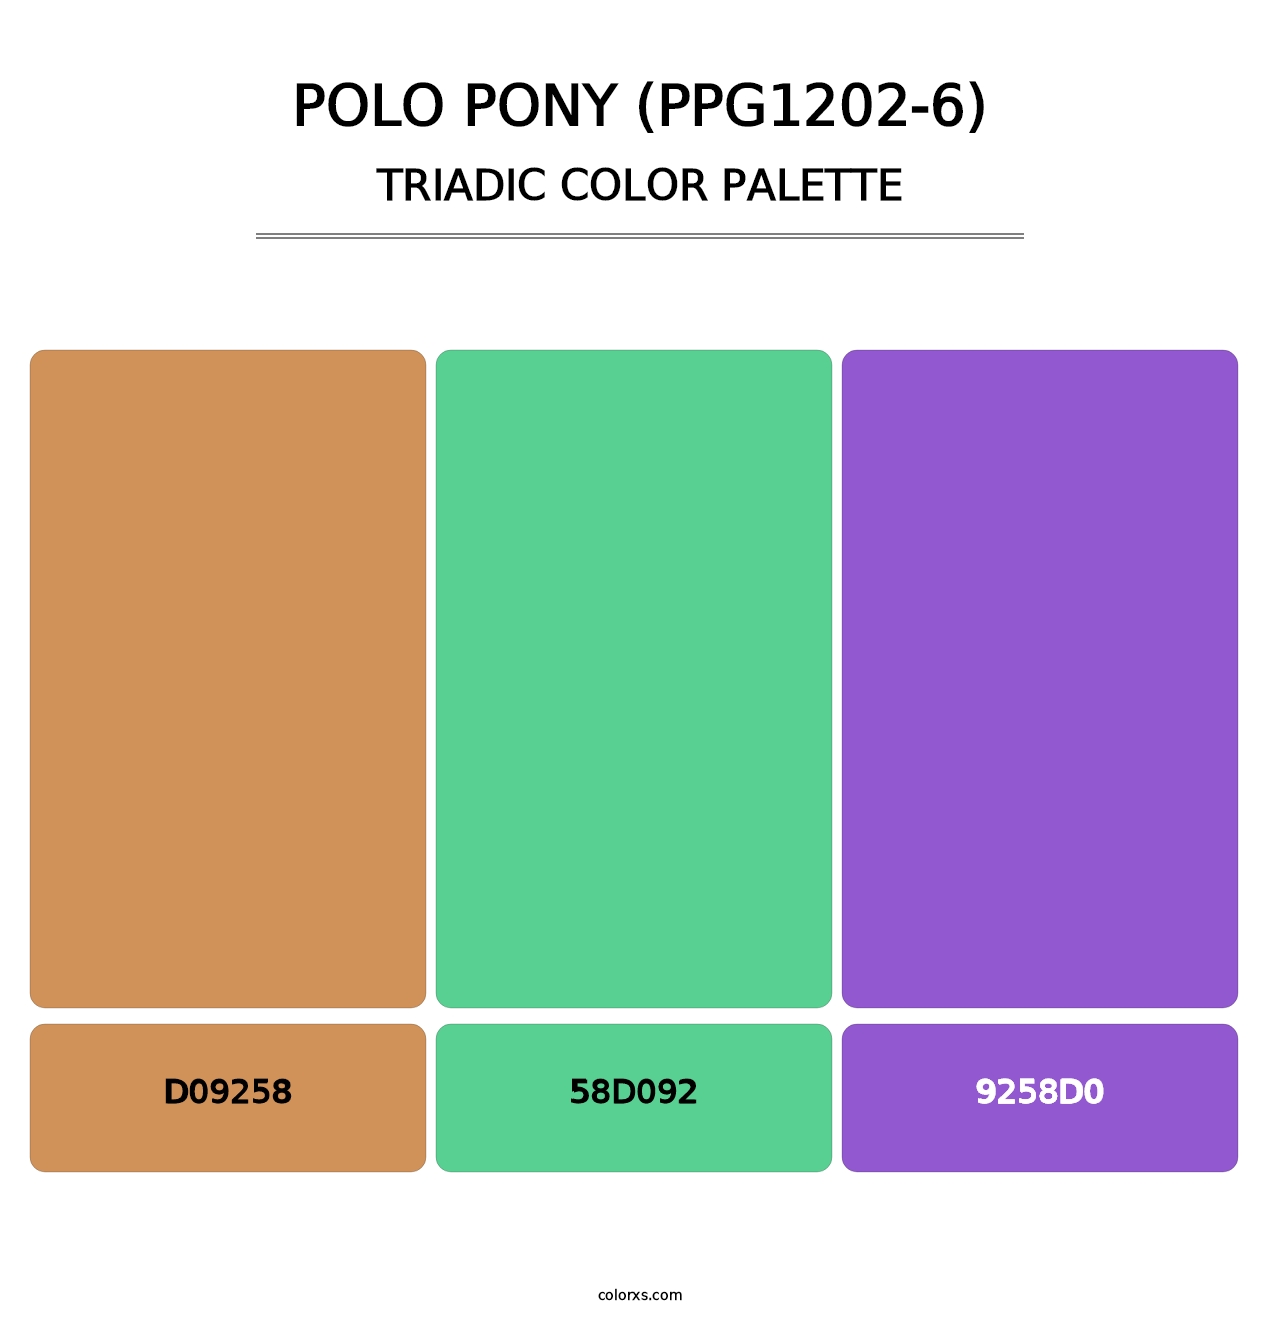 Polo Pony (PPG1202-6) - Triadic Color Palette